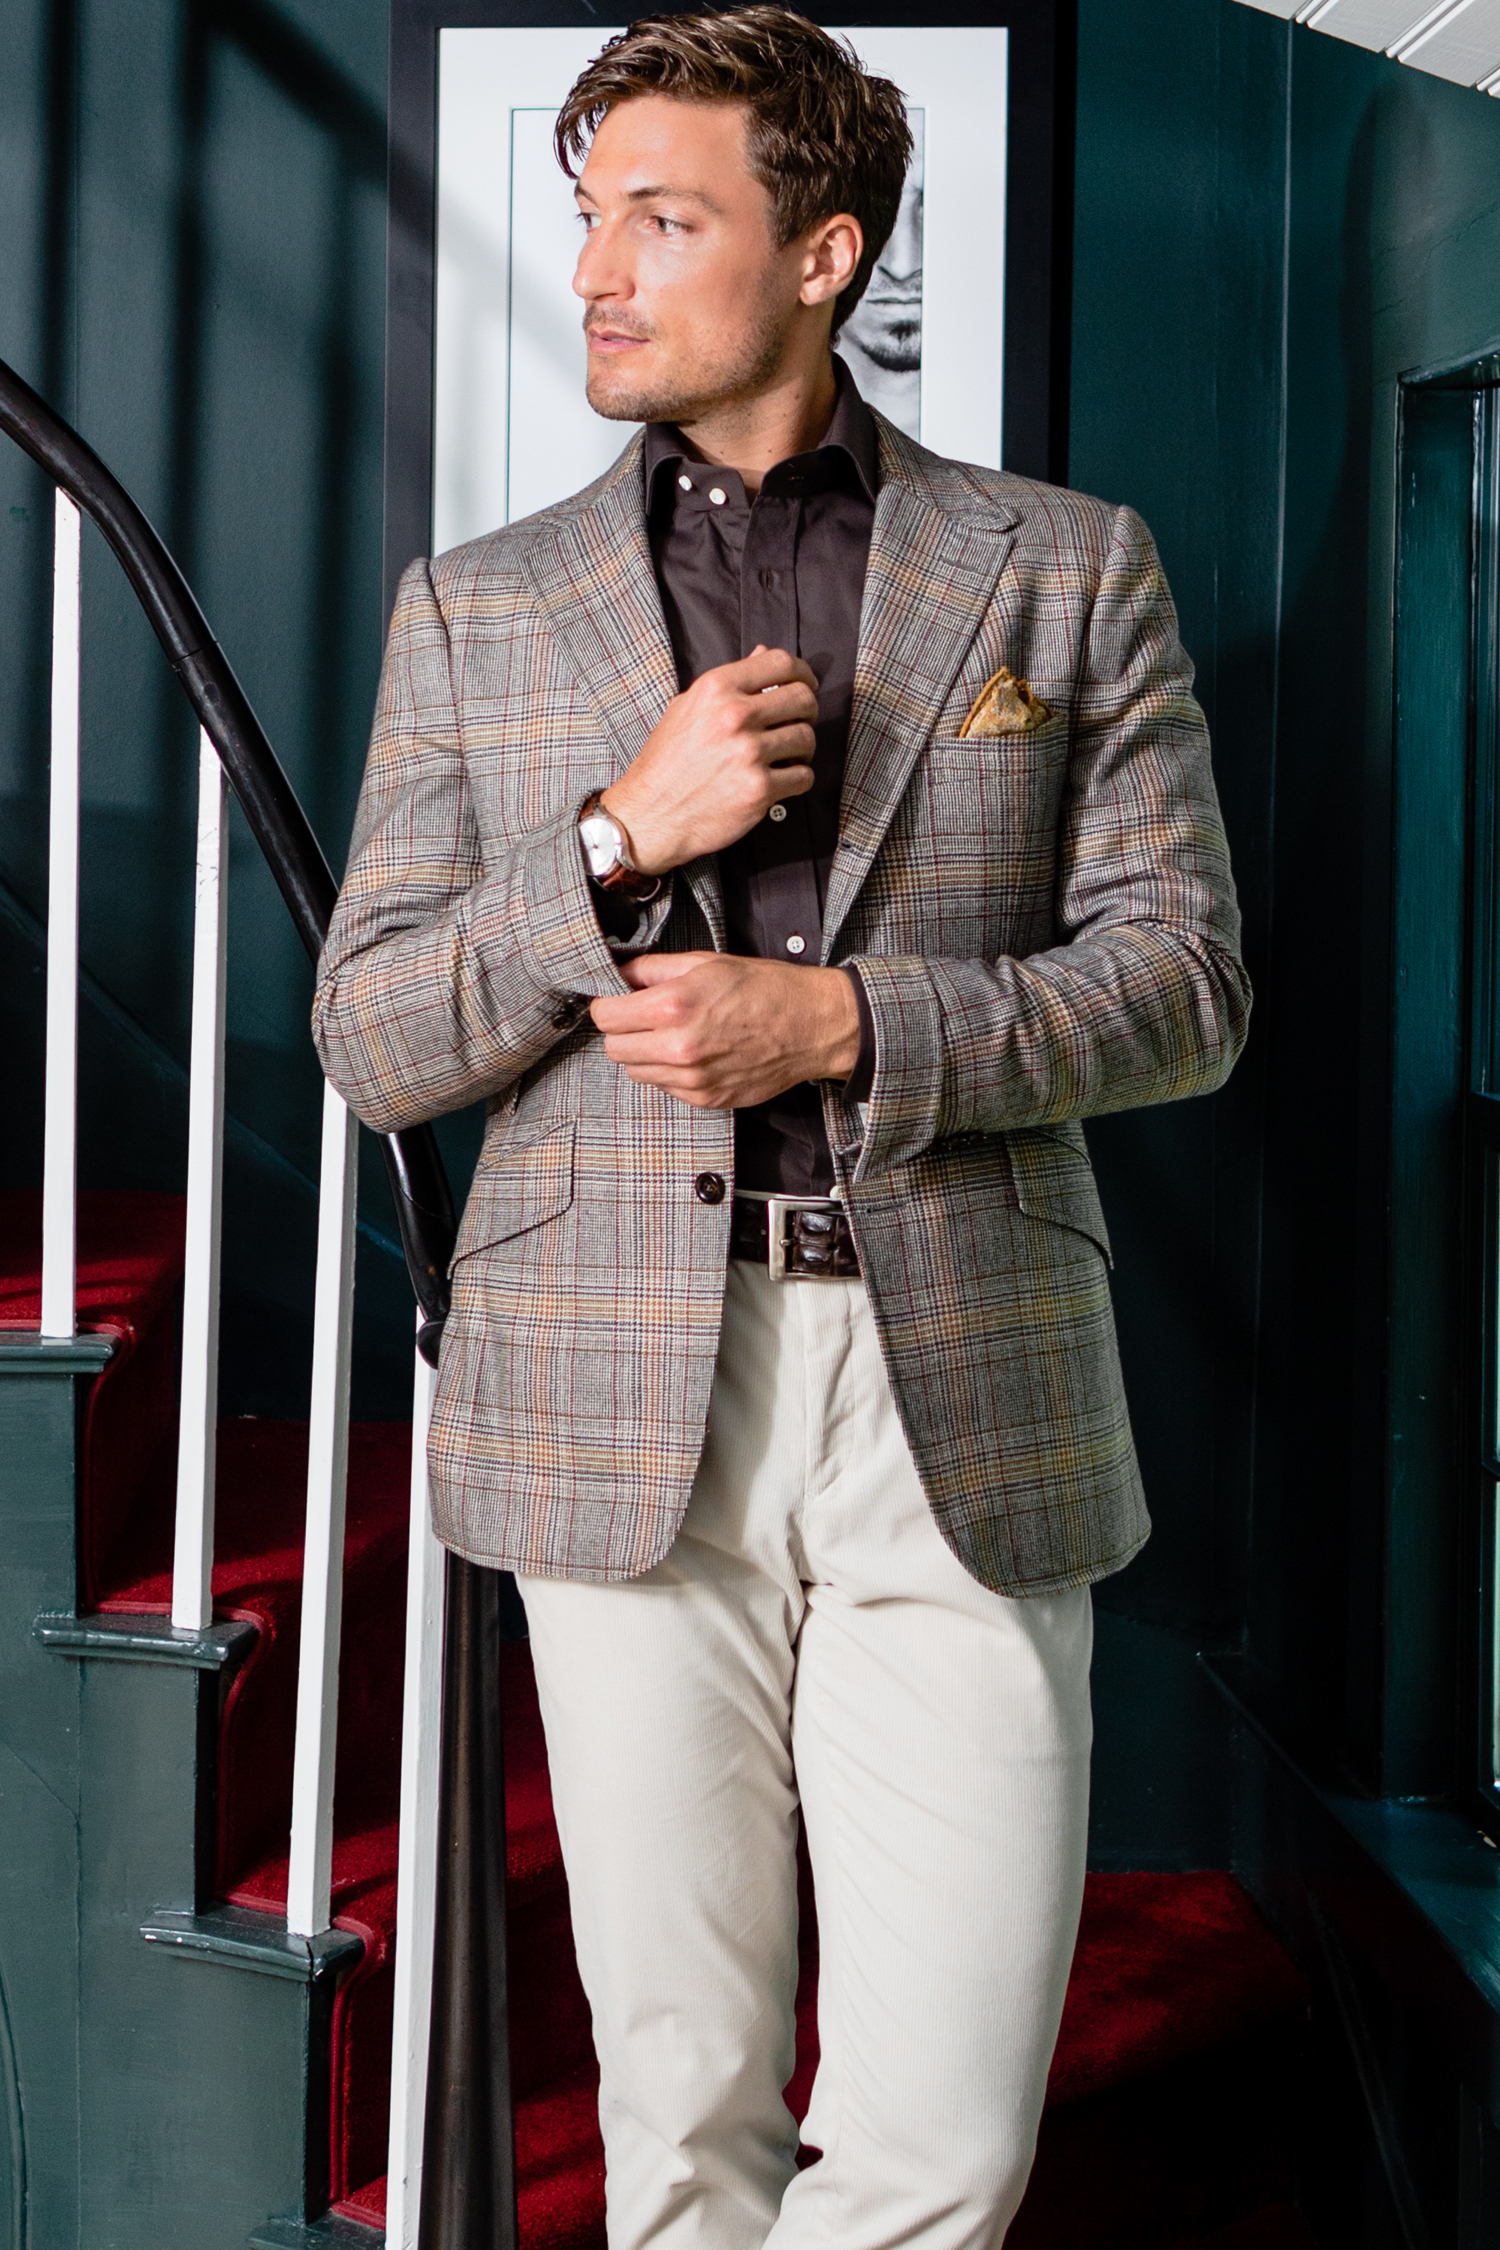 Custom Sport Coats and Blazers from New York's Top Bespoke Tailor